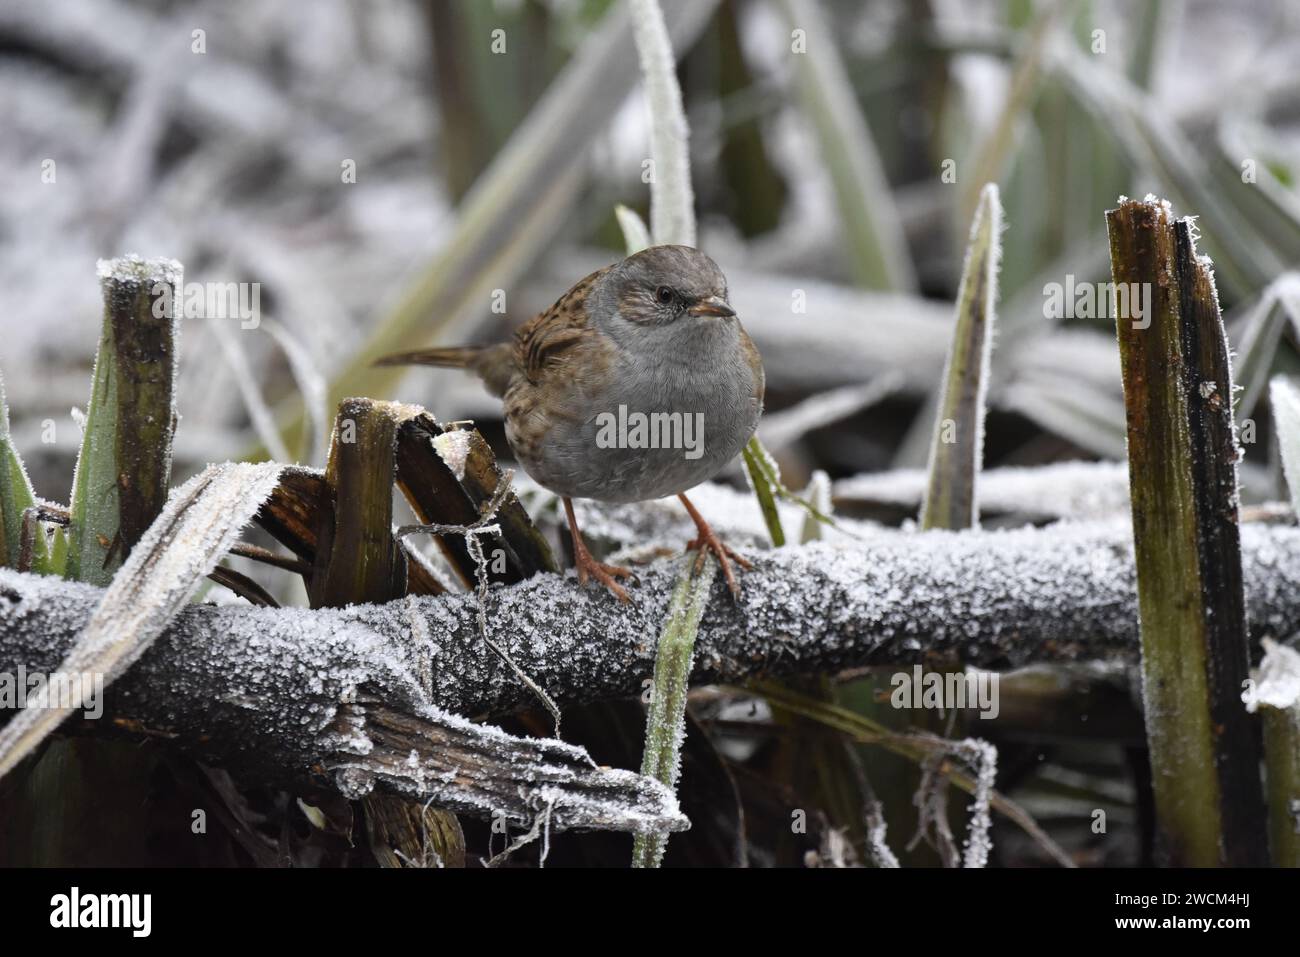 Dunnock (Prunella modularis) Perched on a Frosty Log, Facing Camera, against a Frosty Woodland Background, taken in the UK in Winter Stock Photo